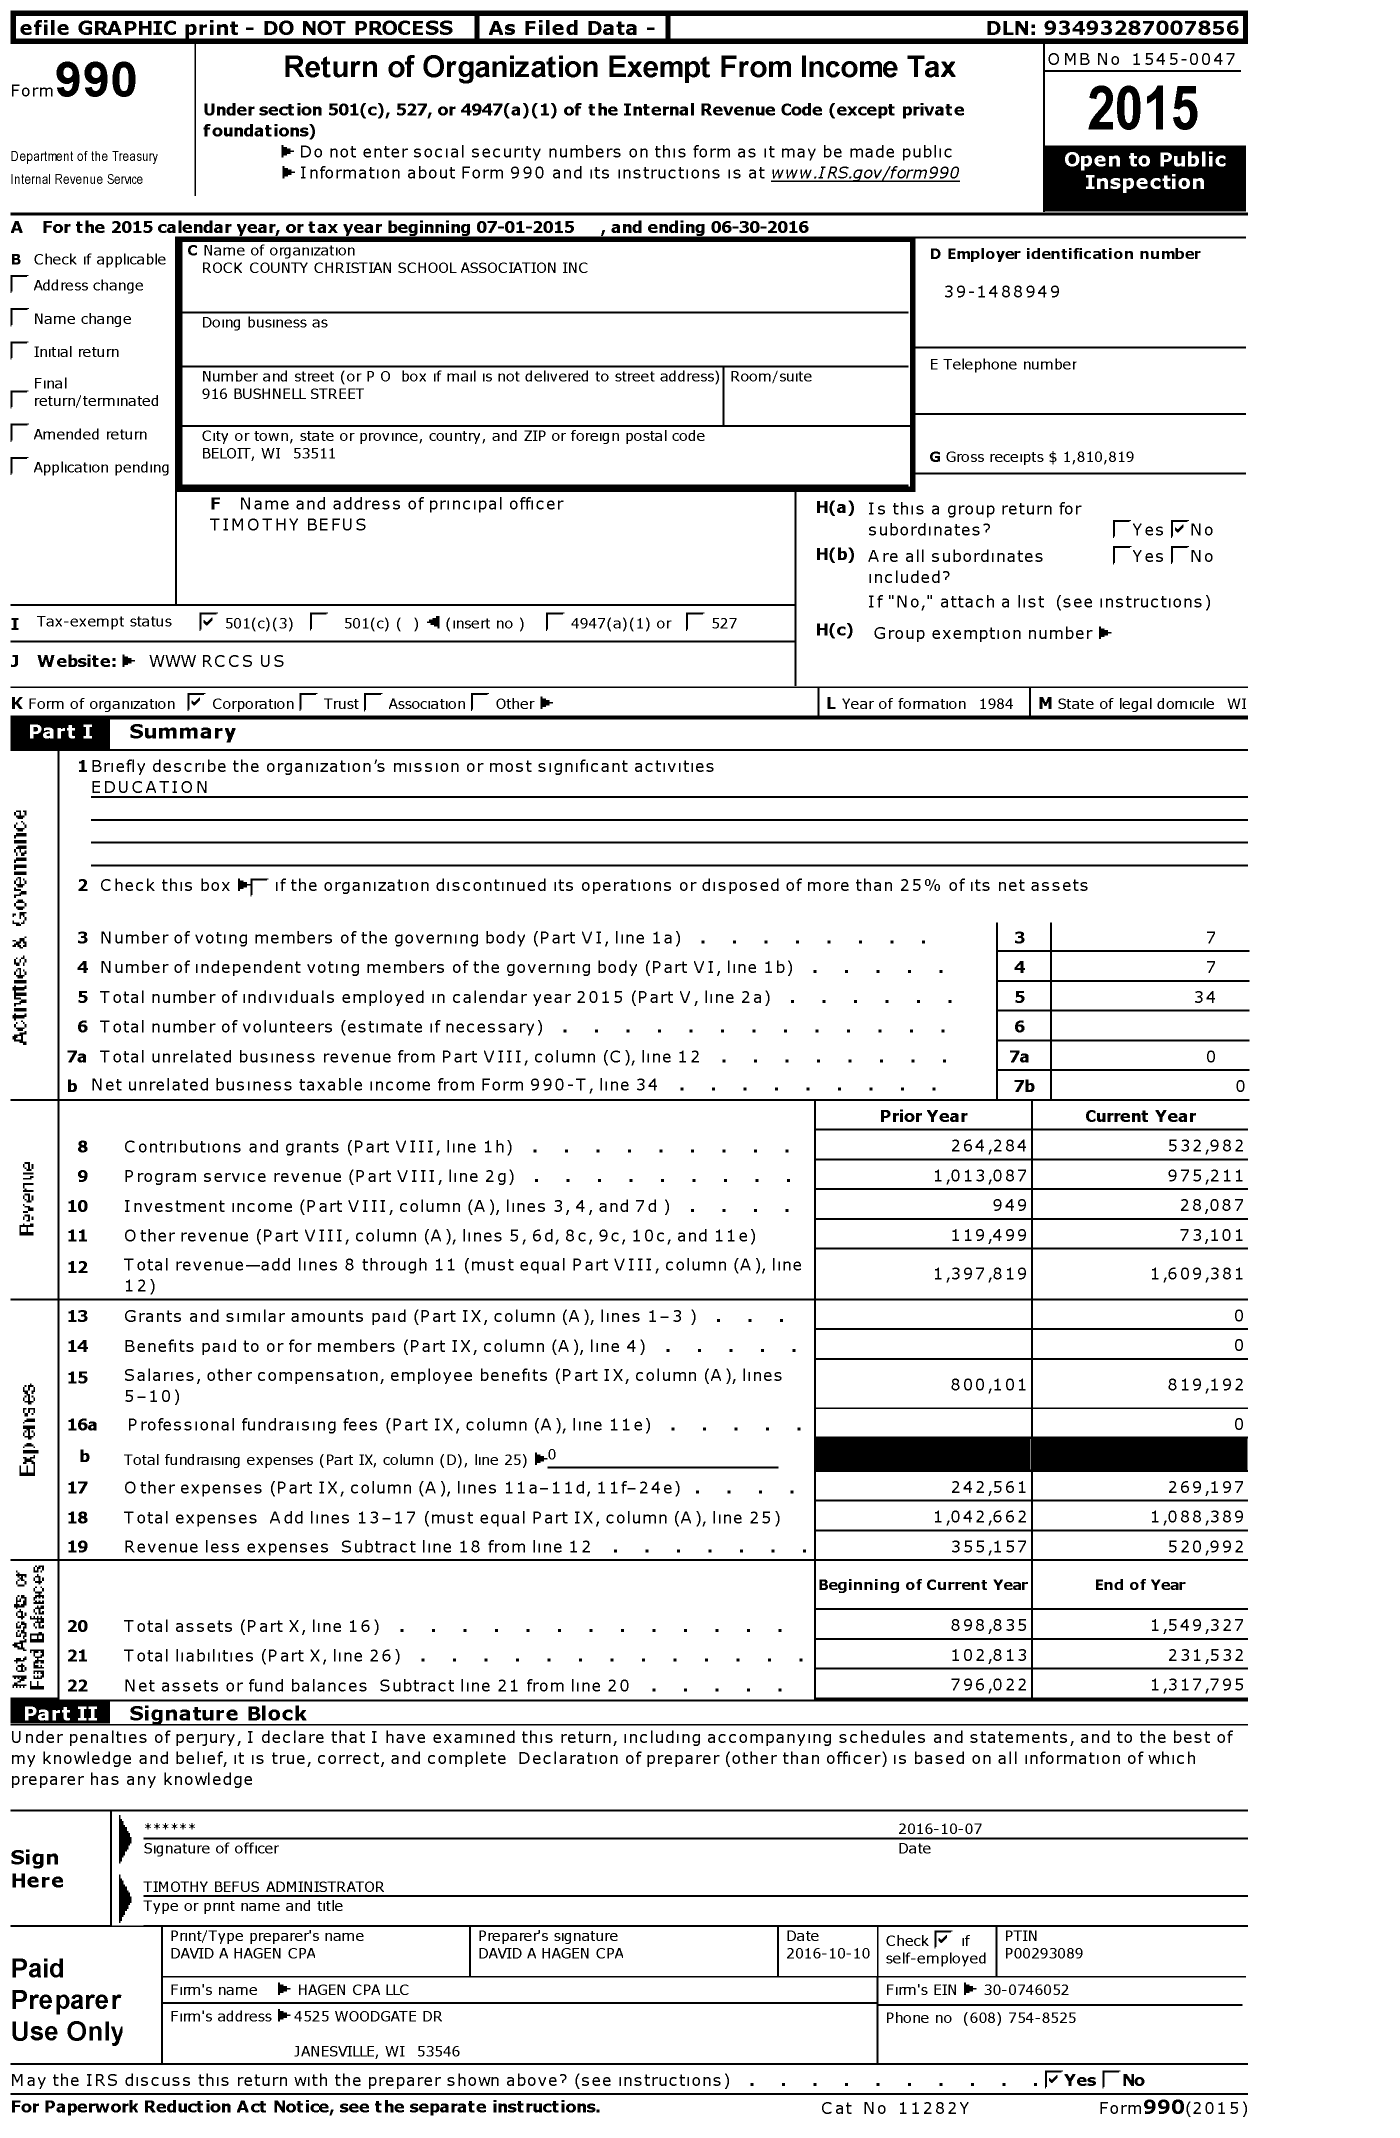 Image of first page of 2015 Form 990 for Rock County Christian School Association